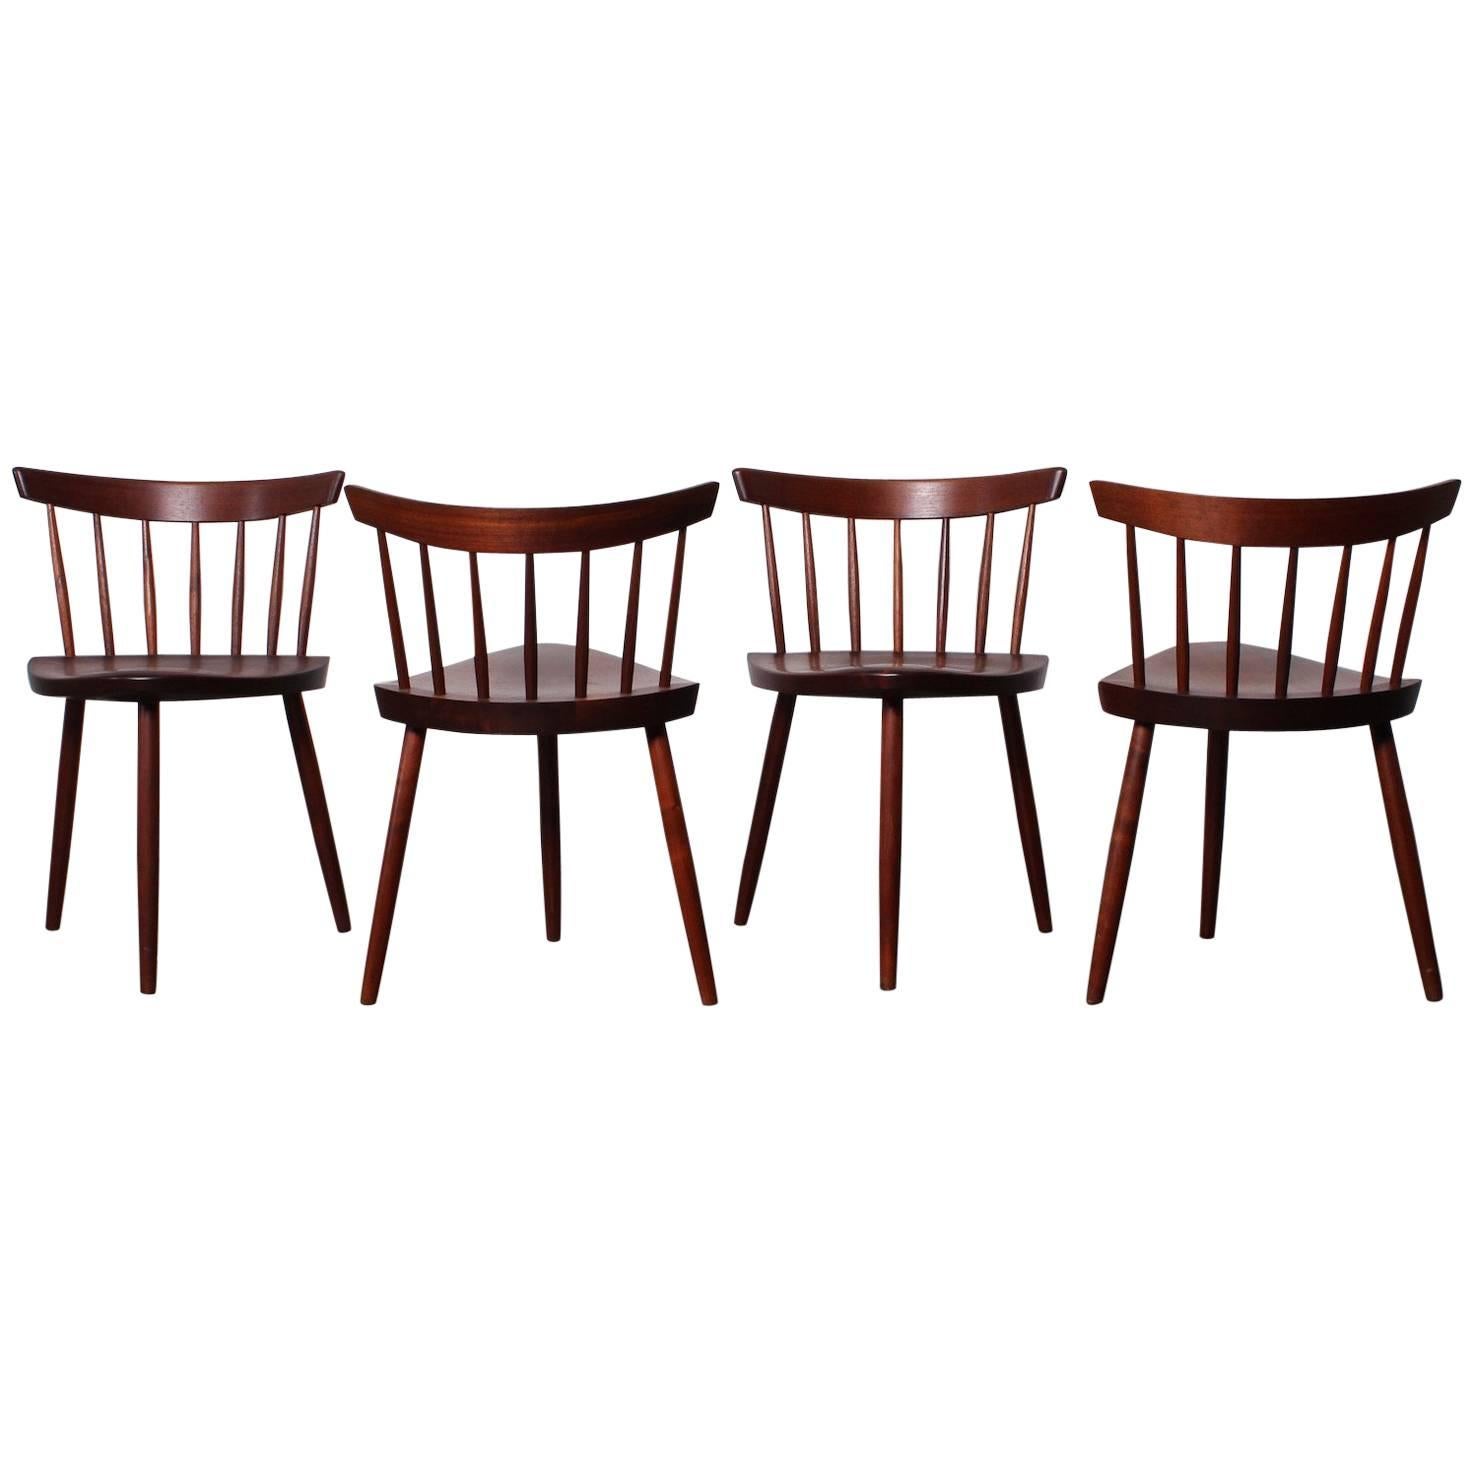 Set of Four Mira Chairs by George Nakashima, 1952